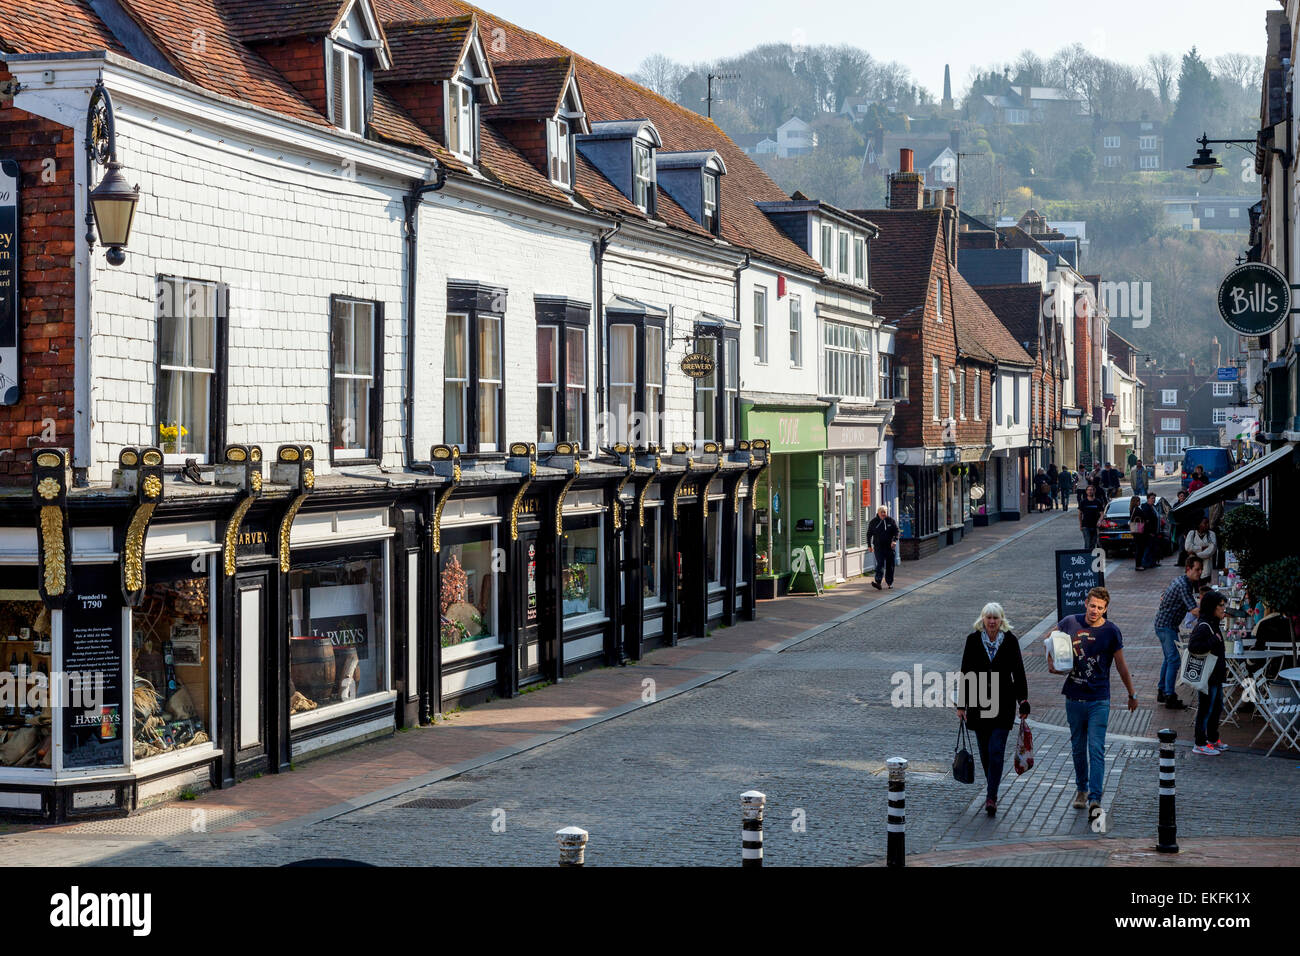 Shops In The High Street, Lewes, East Sussex, UK Stock Photo